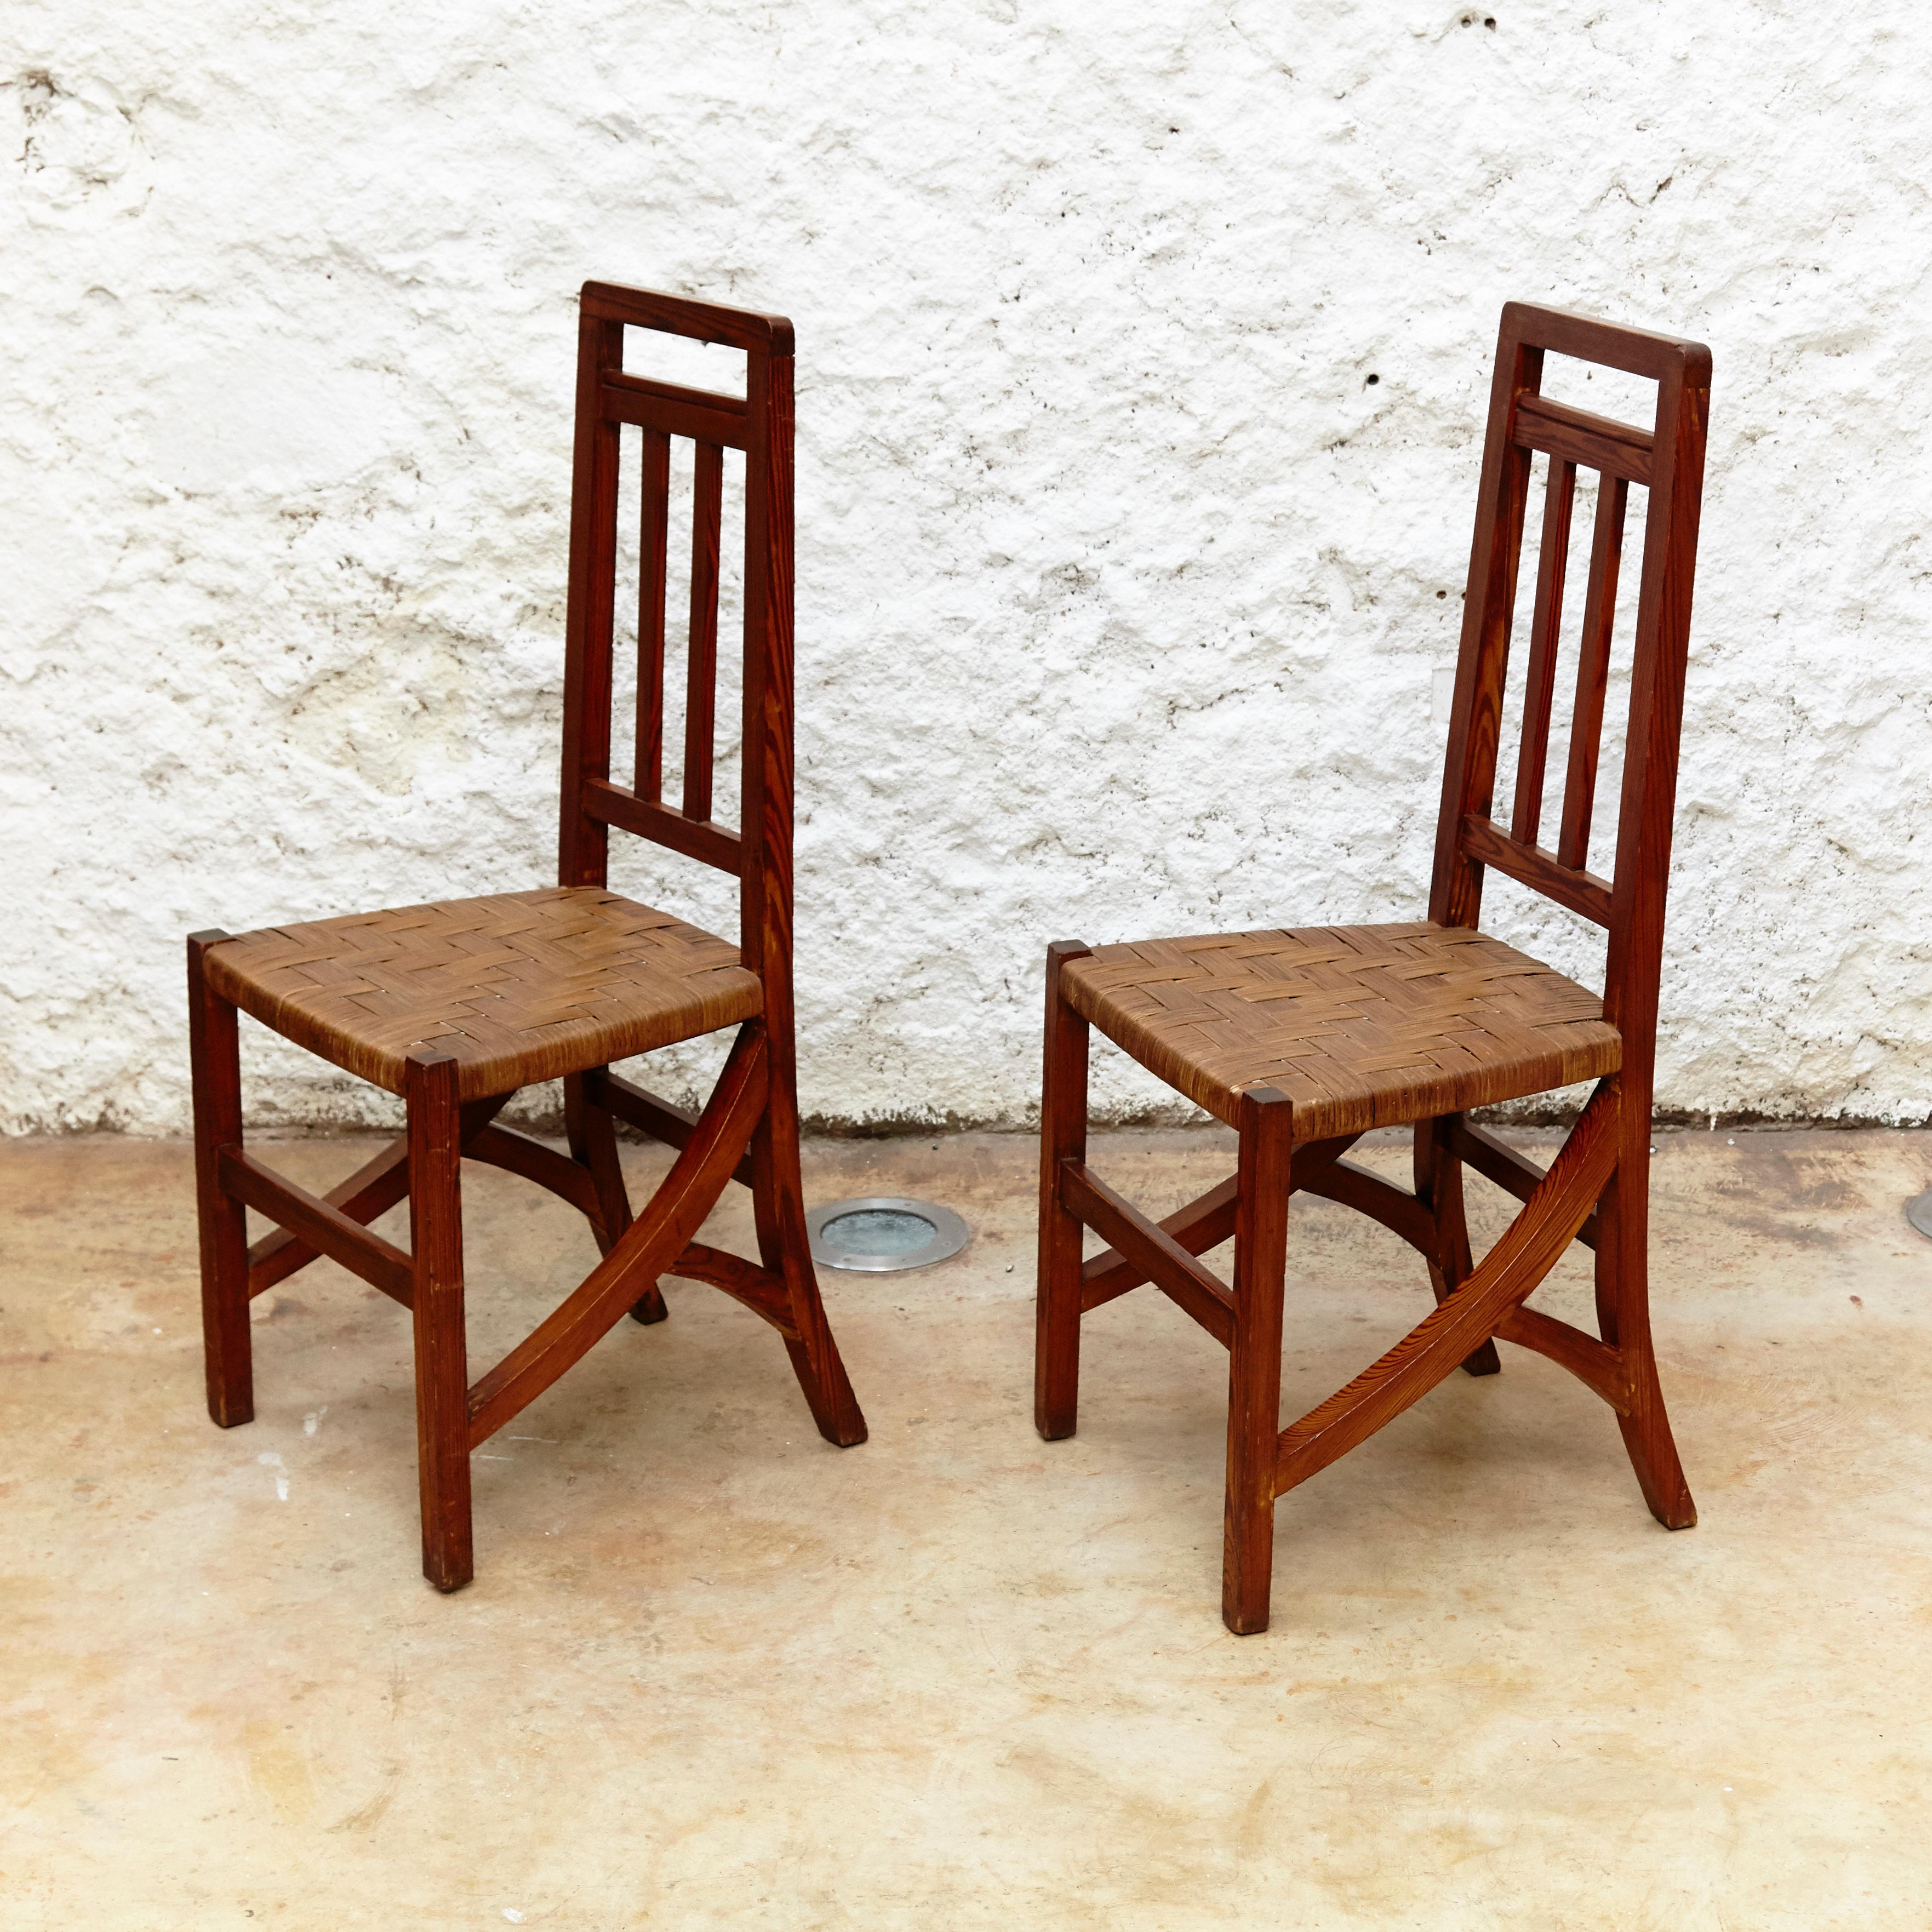 Set of two Arts & Crafts chairs in wood and rattan, circa 1910
By unknown designer and manufacturer.
Manufactured in Spain, circa 1910.
Wood and rattan.

In original condition with minor wear consistent of age and use, preserving a beautiful